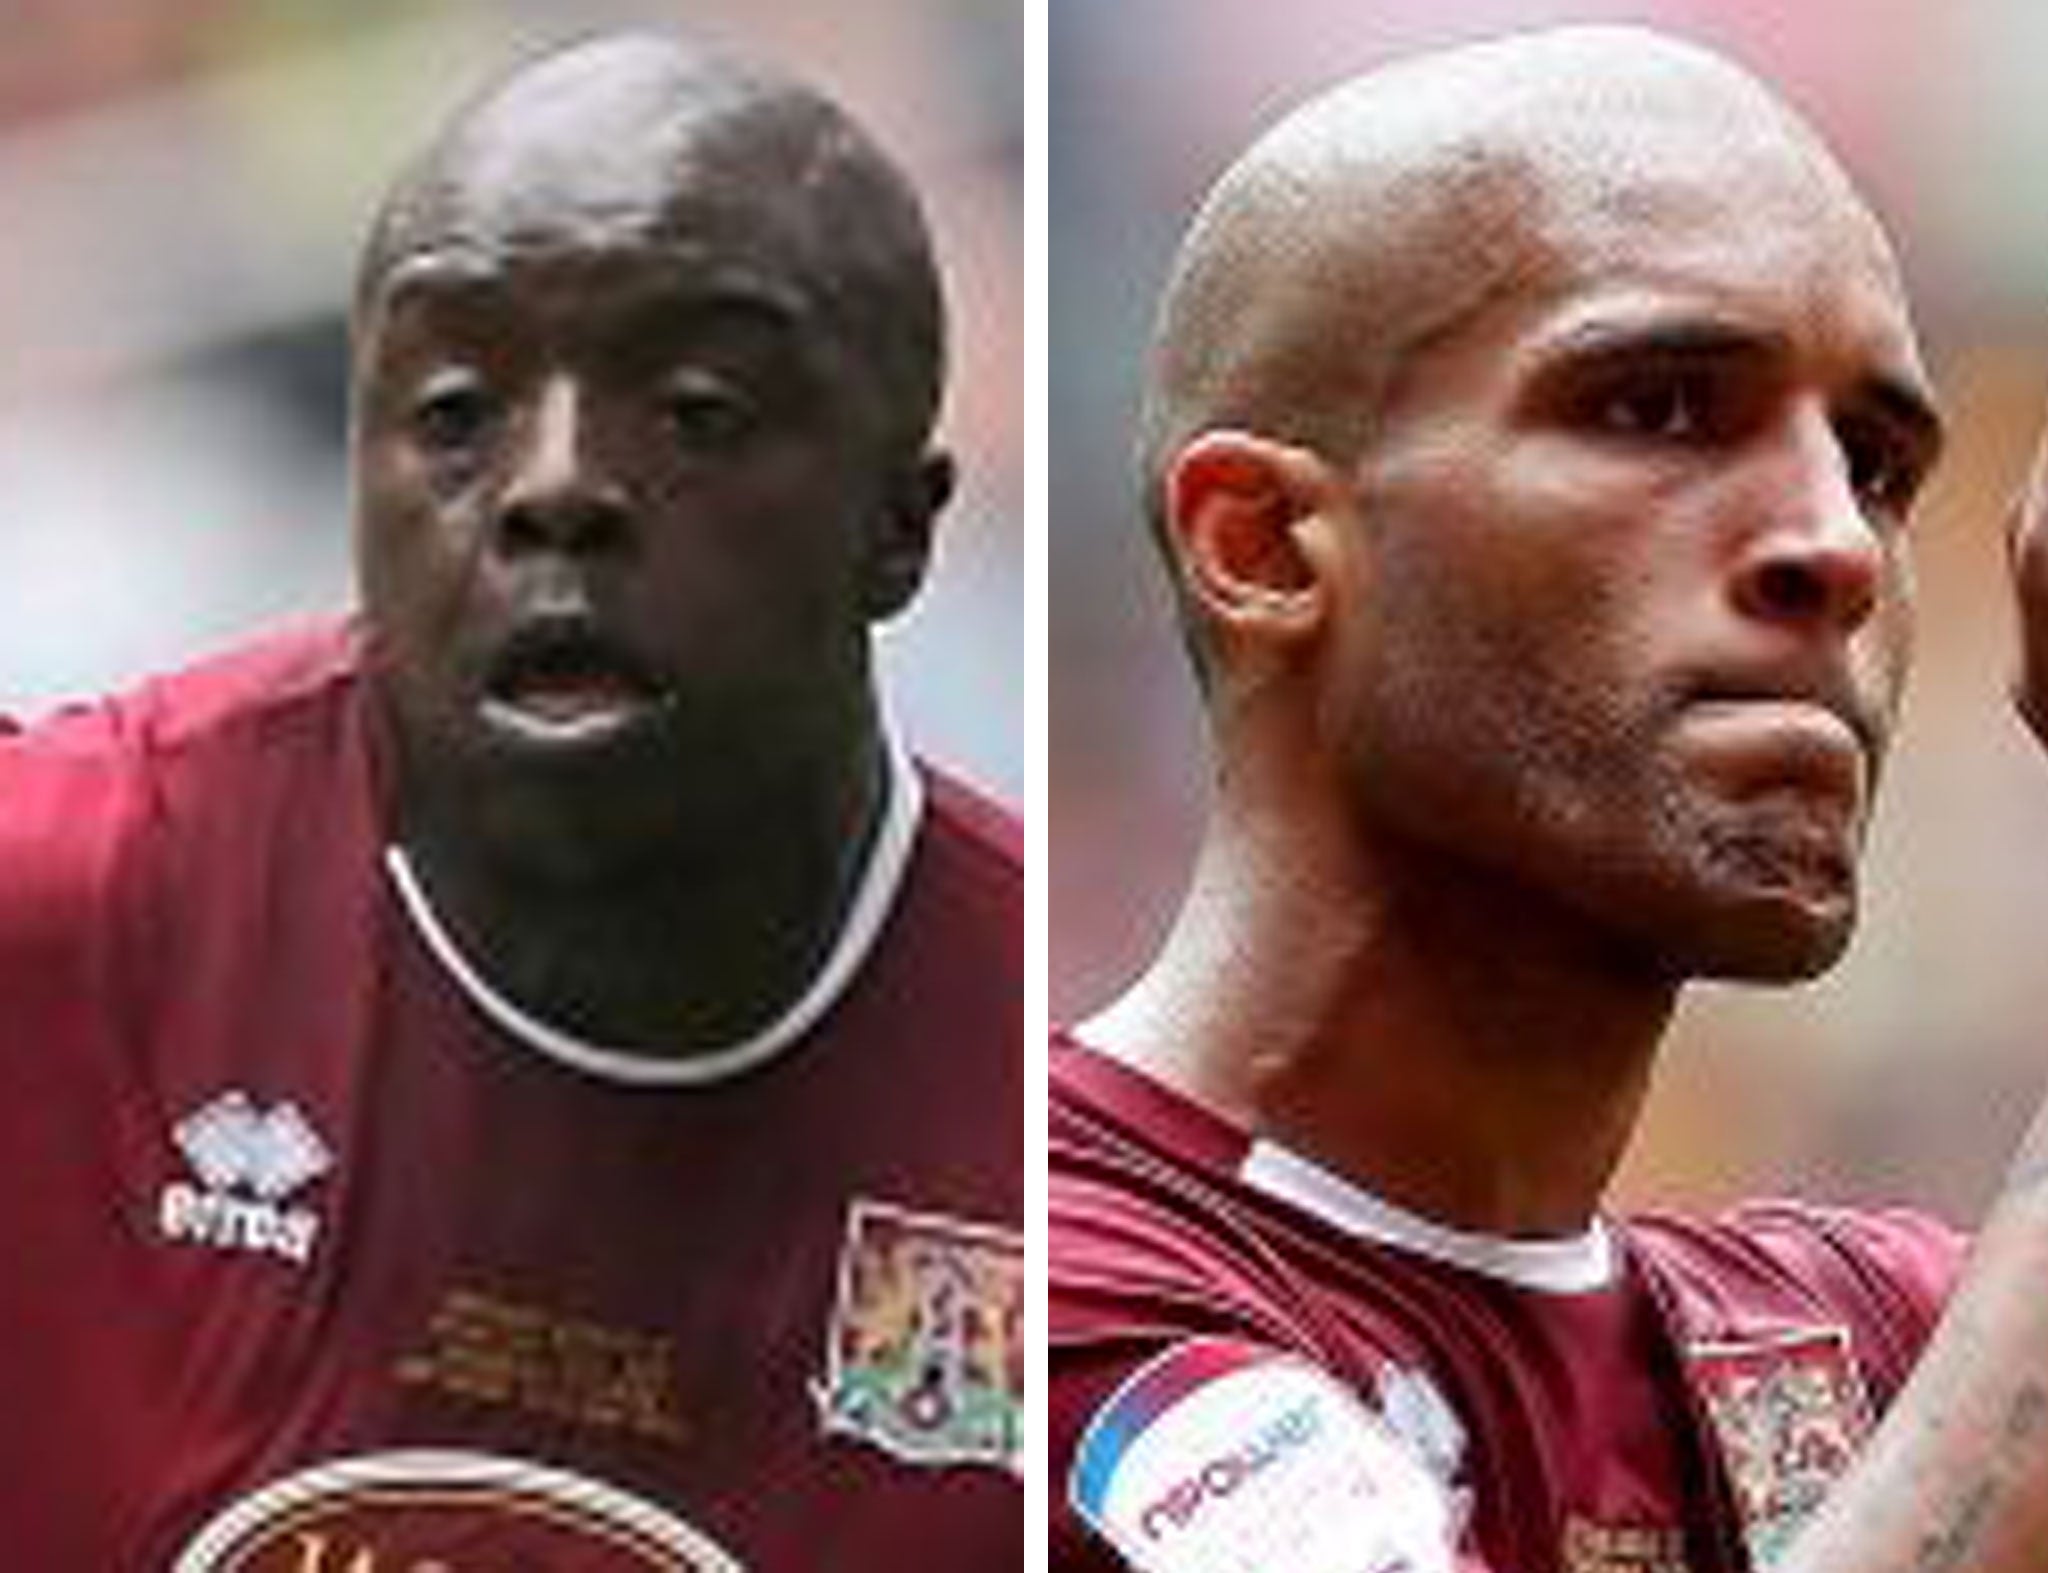 Northampton Town's Adebayo Akinfenwa (left) and Clarke Carlisle (right) were targeted by allegedly racist tweets